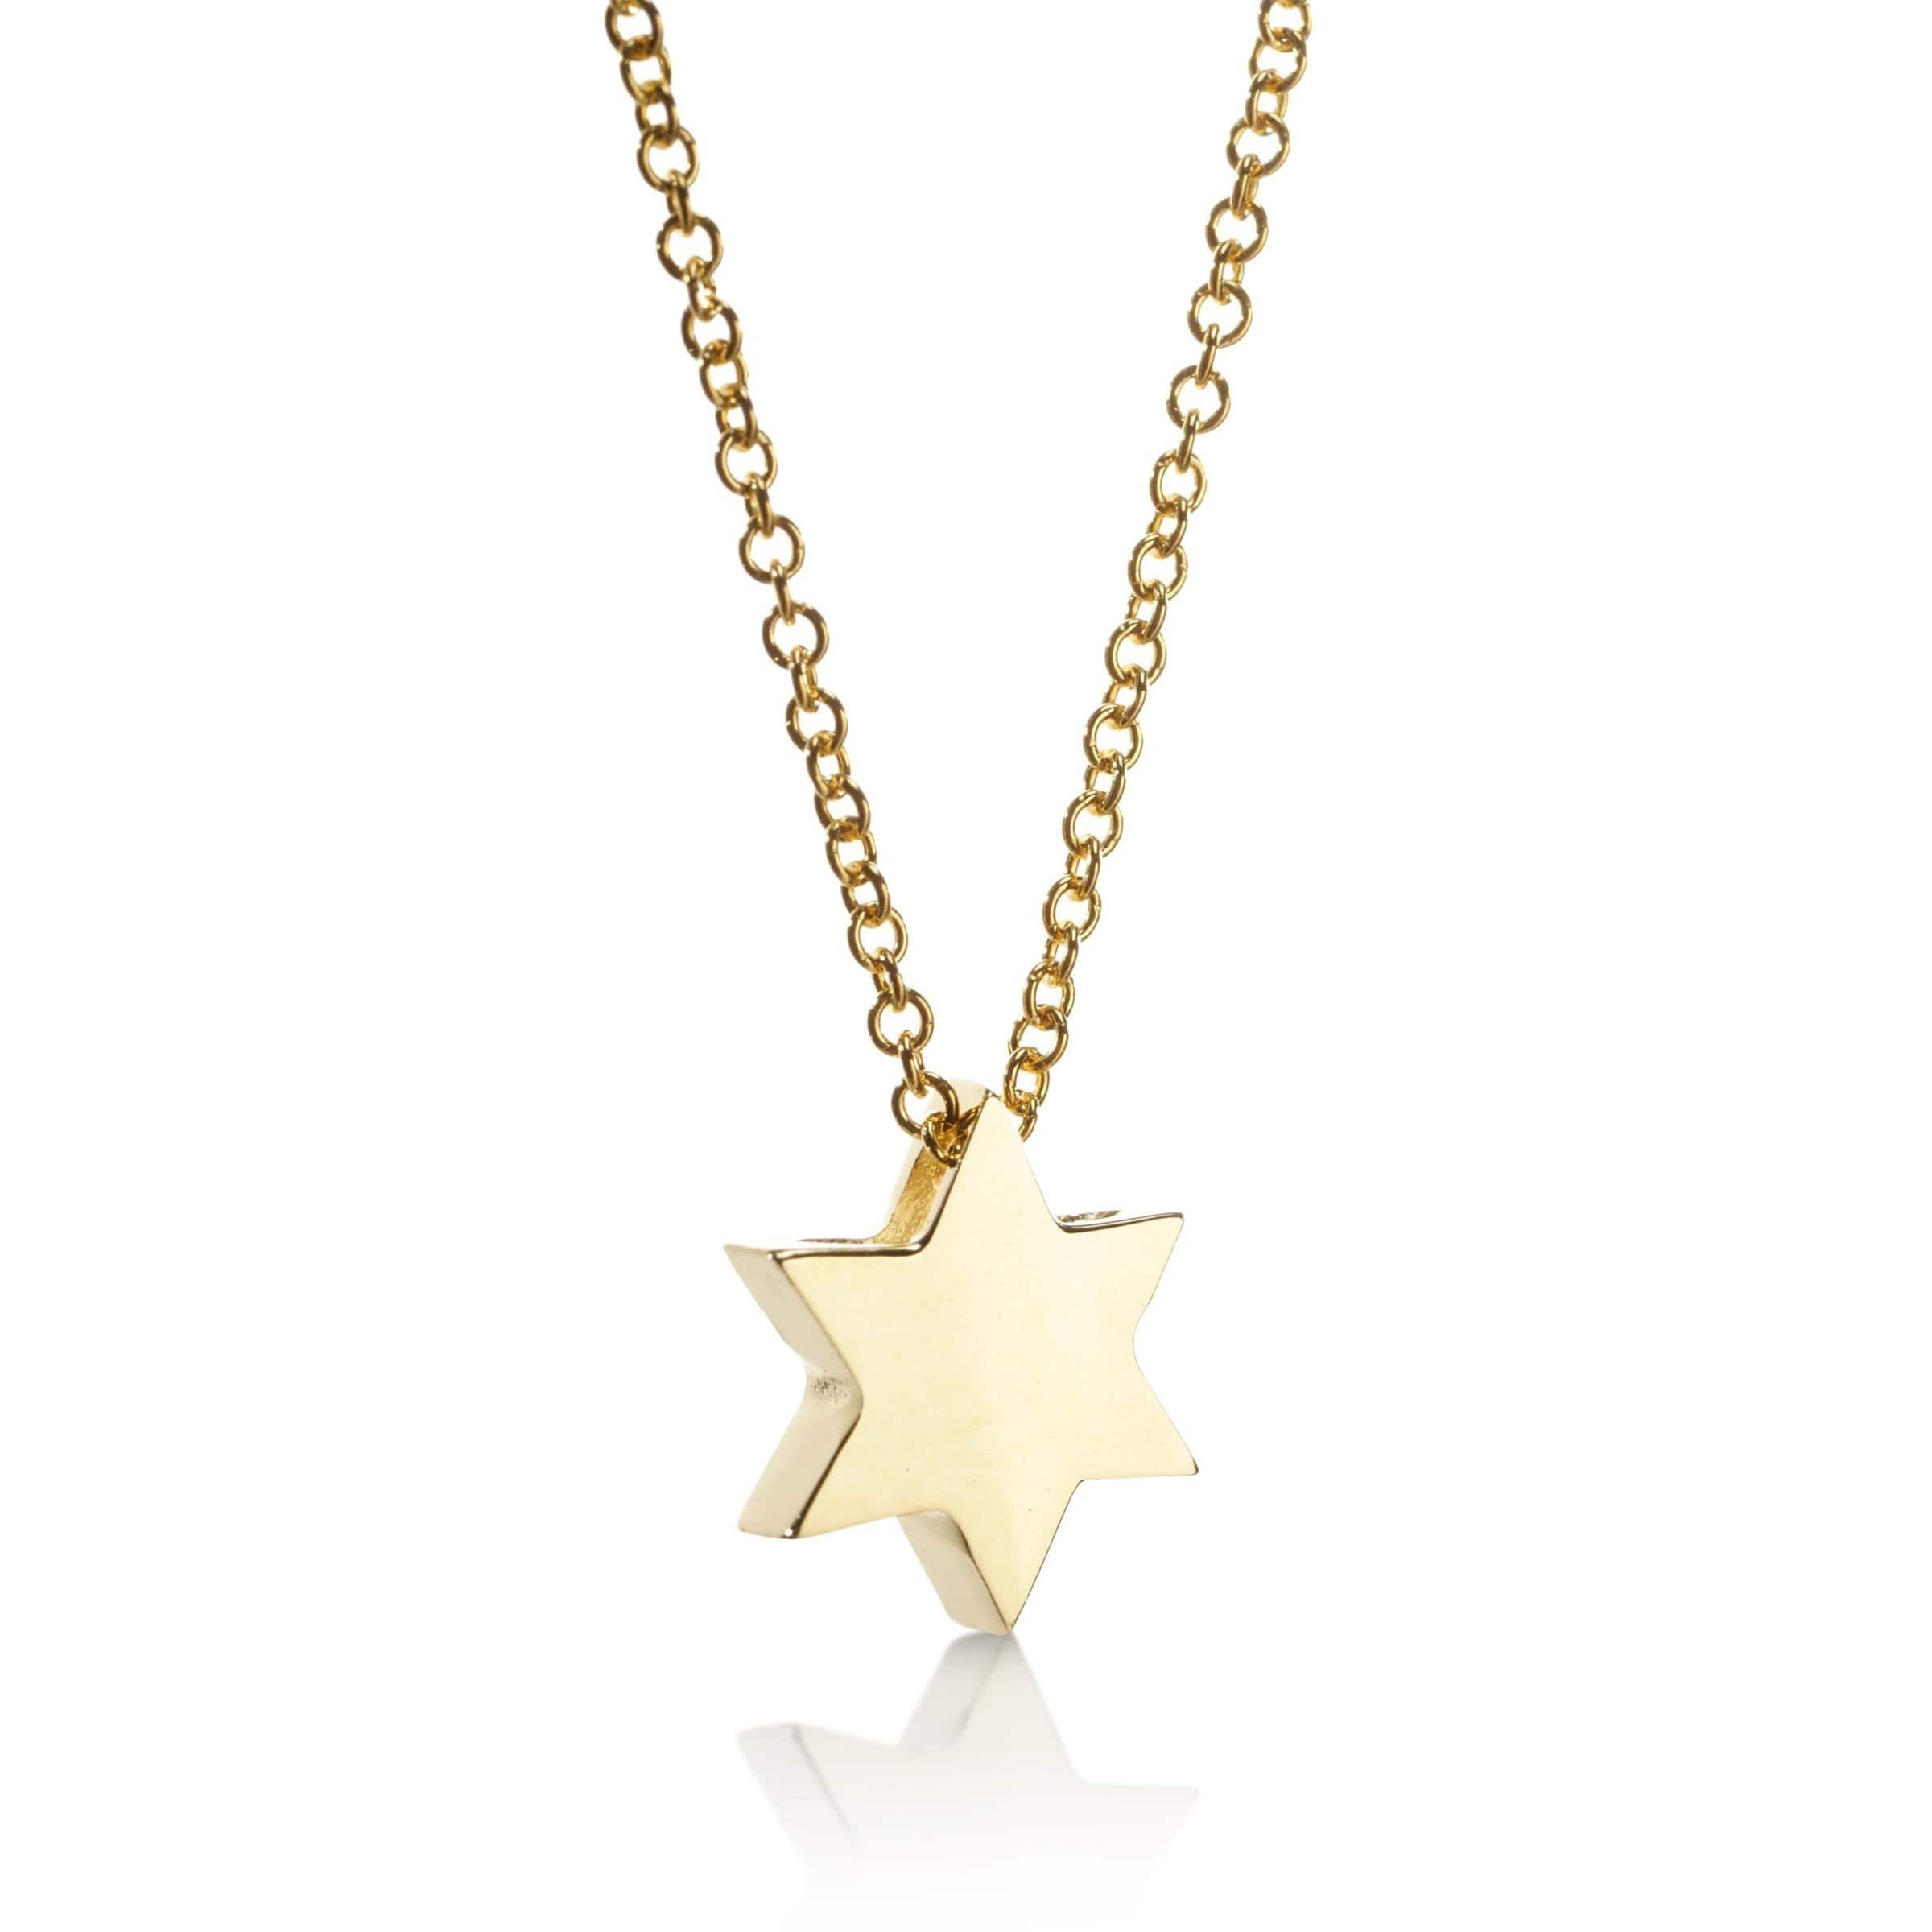 Alef Bet Necklaces 14k Gold Star of David Necklace - Gold, White